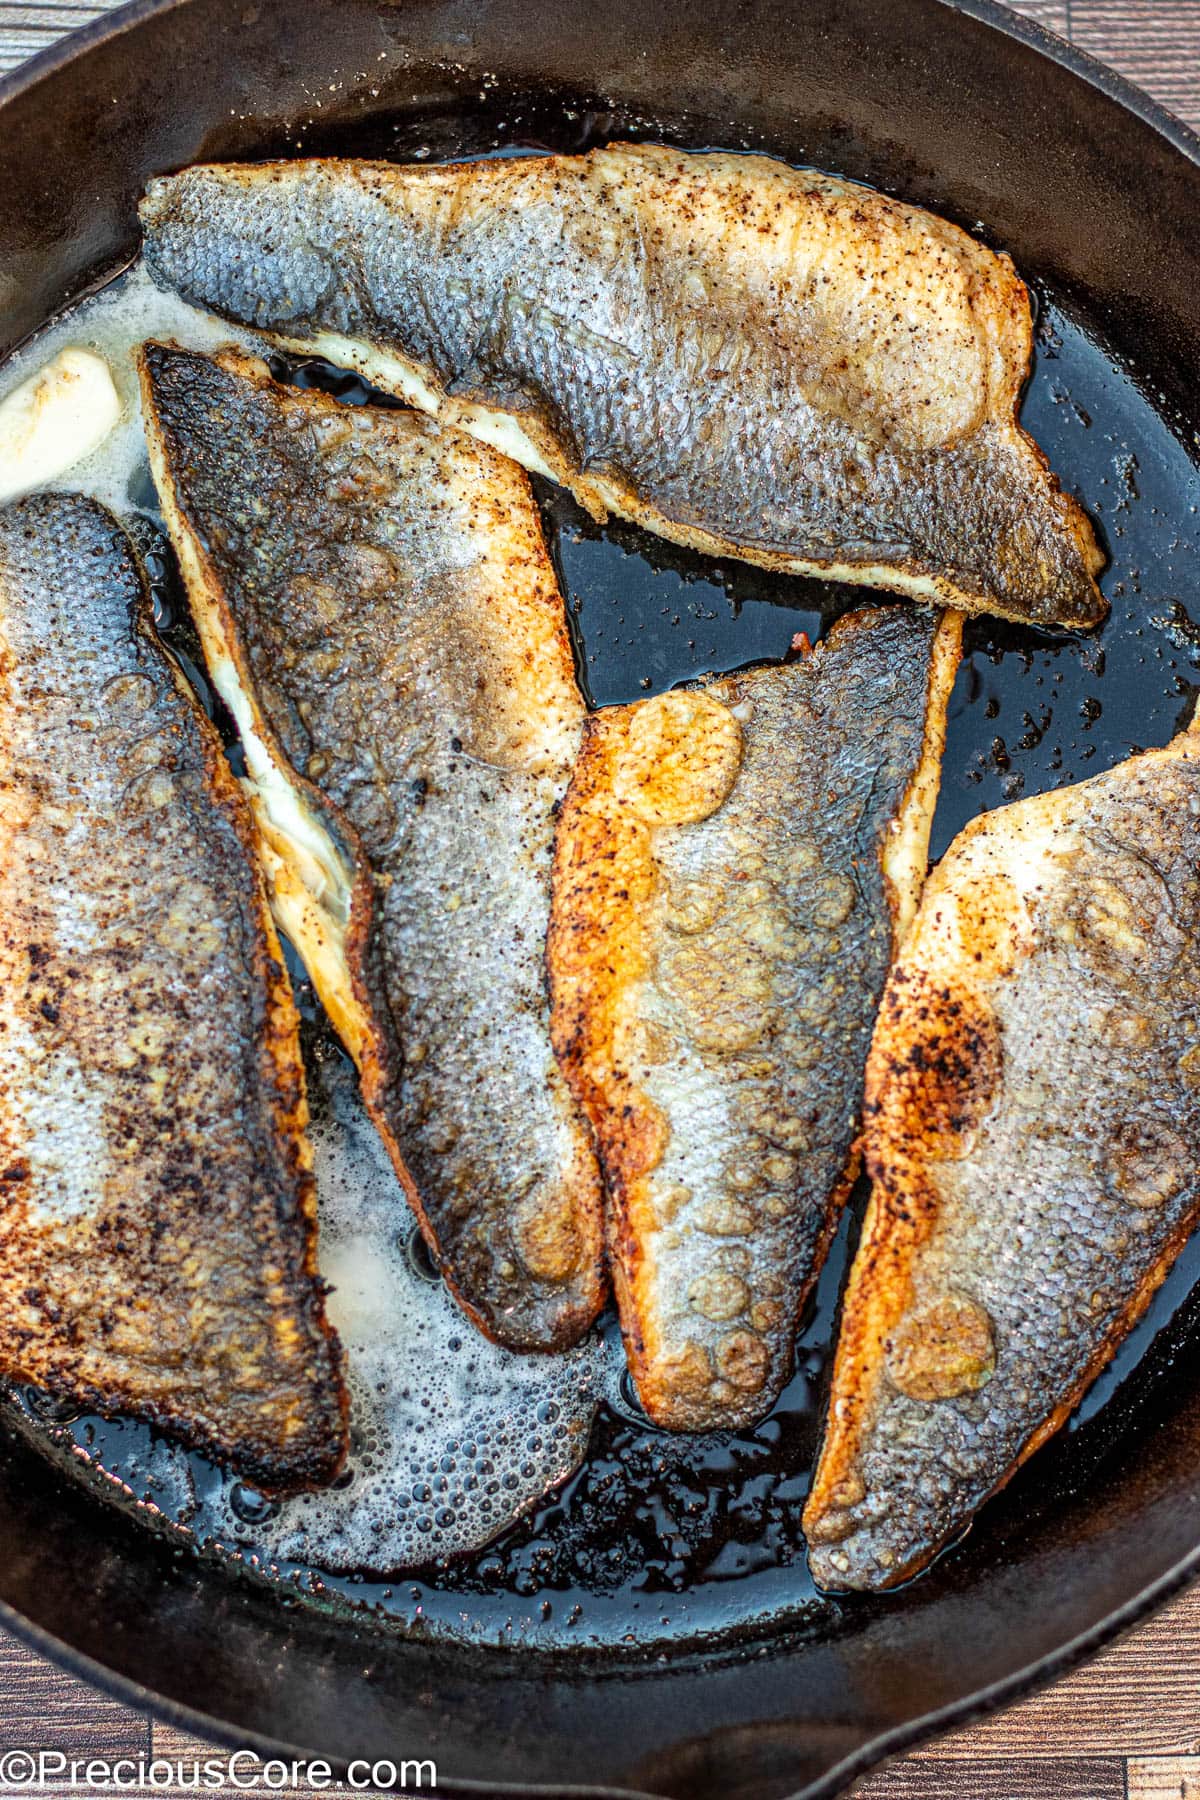 Butter melting in cast iron skillet with fish.